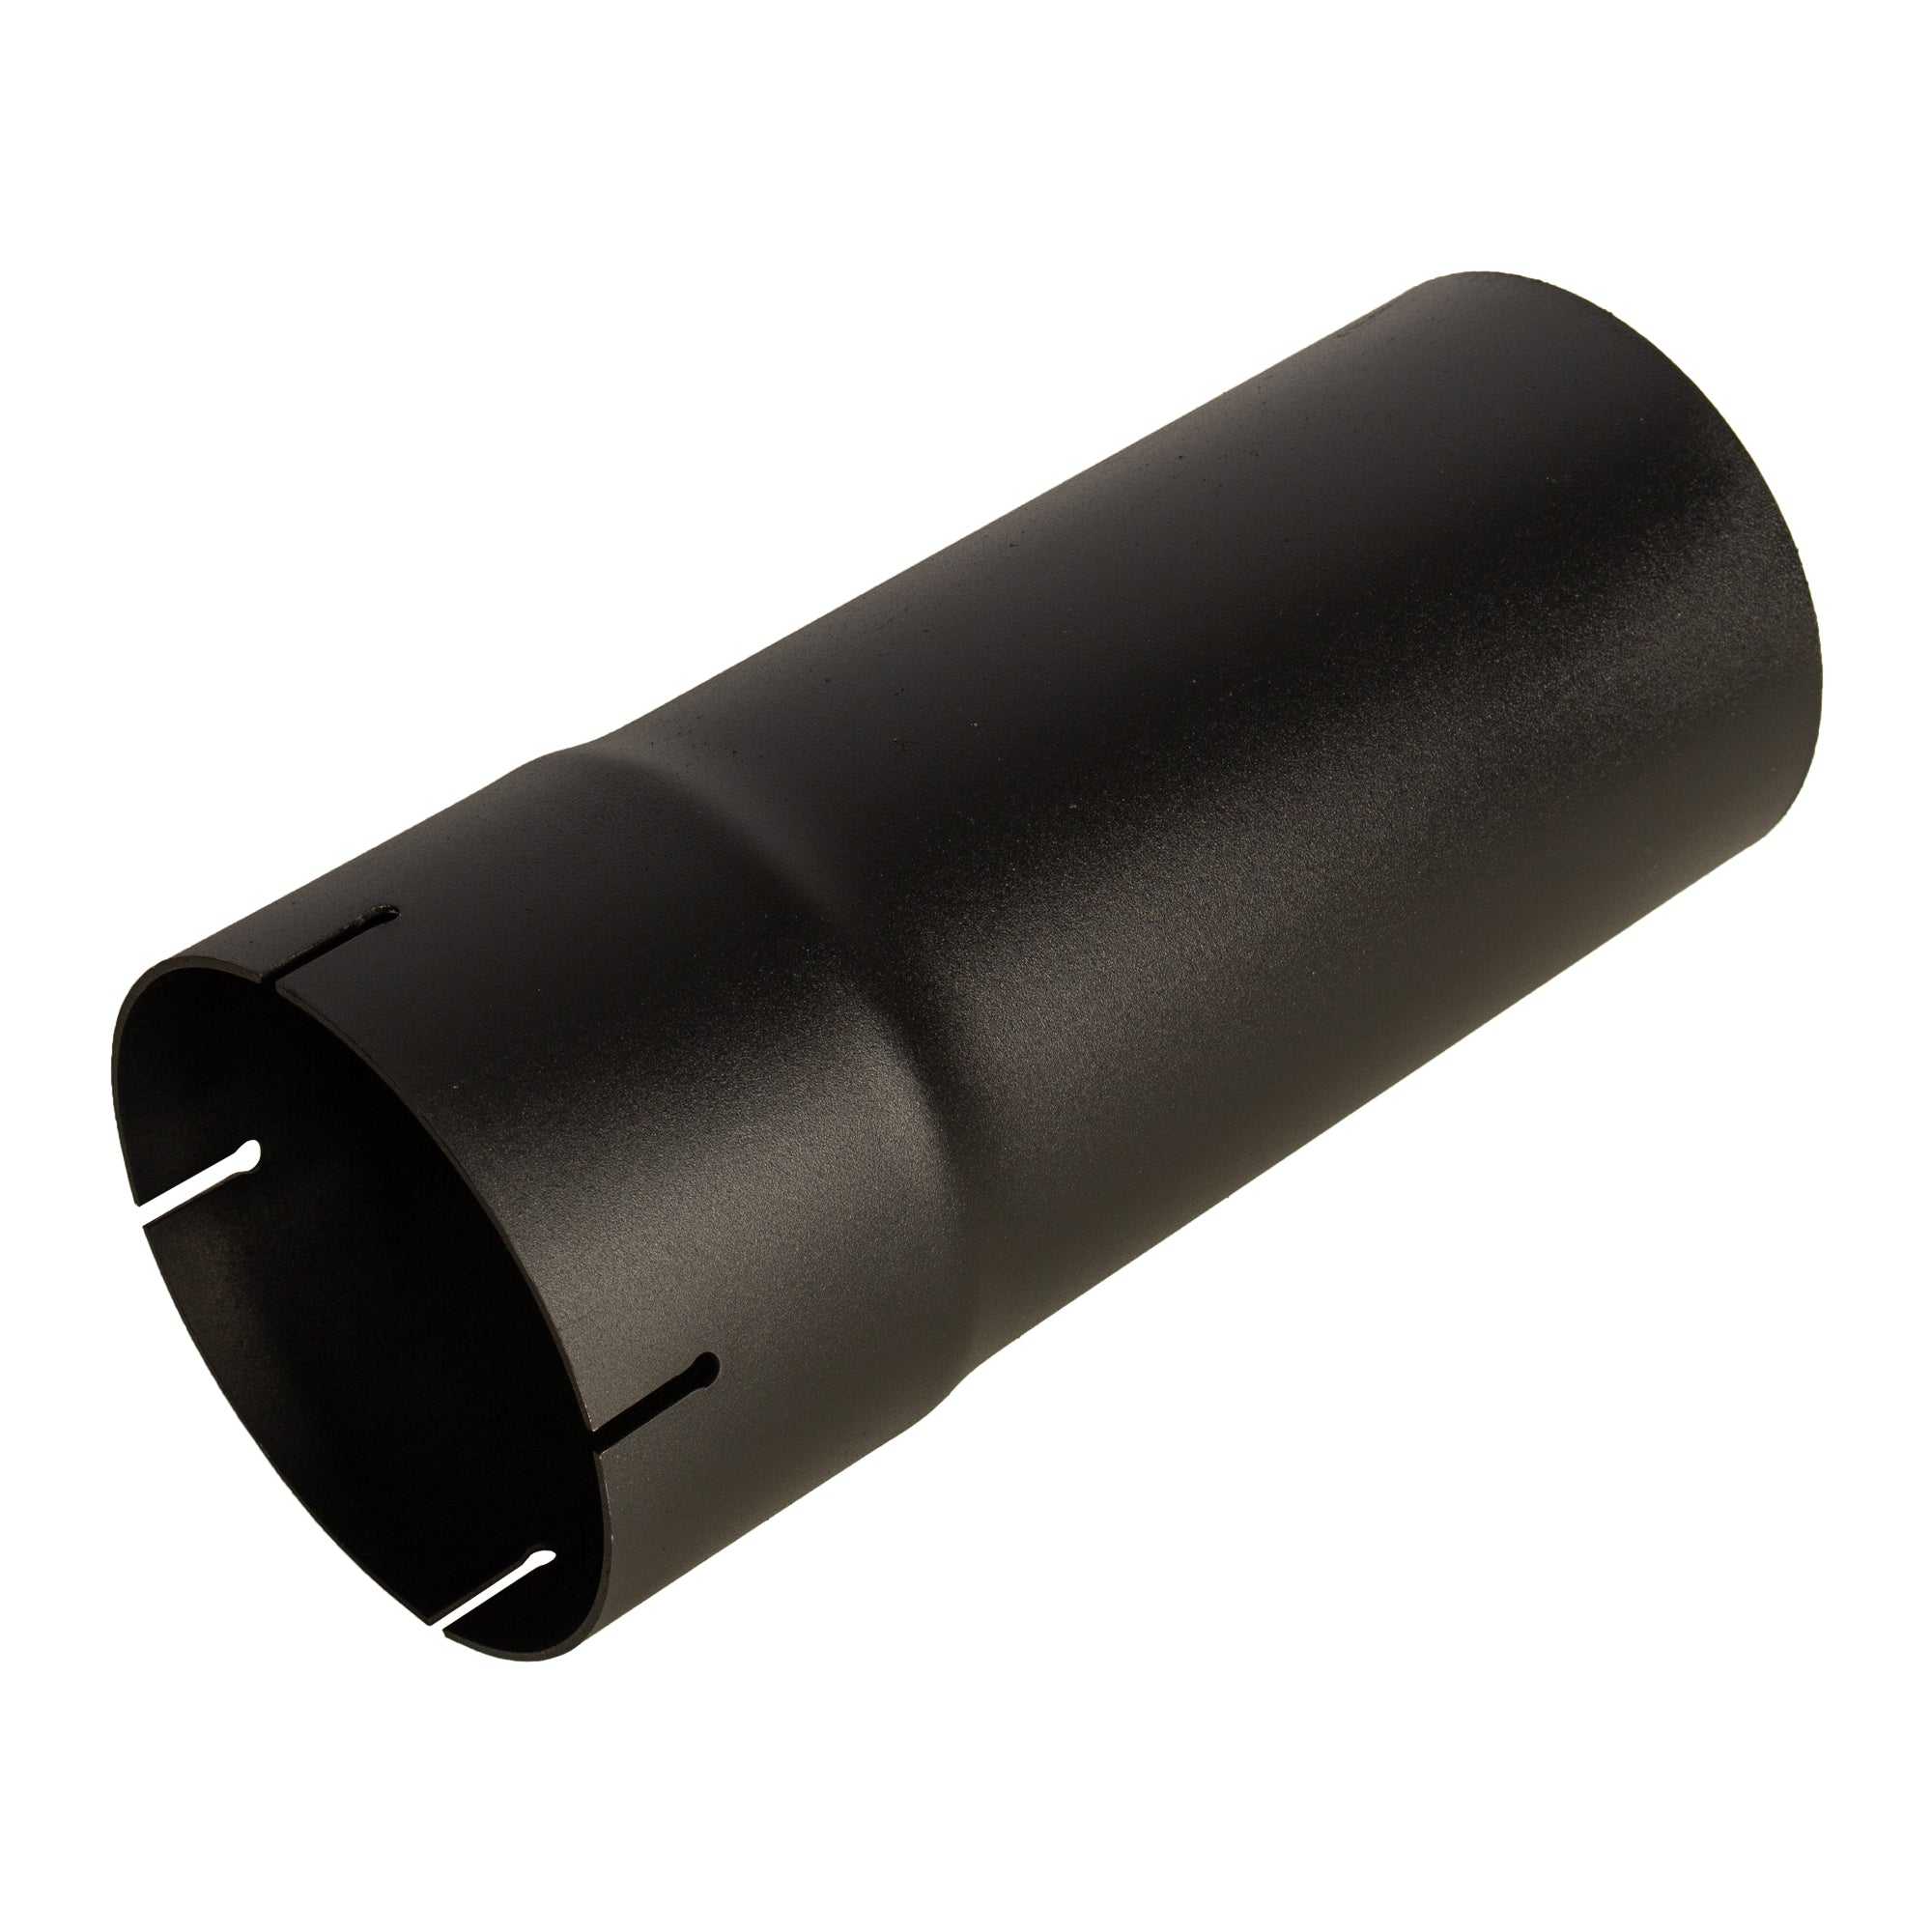 Exhaust Stack Pipe Replacement for UNIVERSAL - 5" x 12" Straight Black